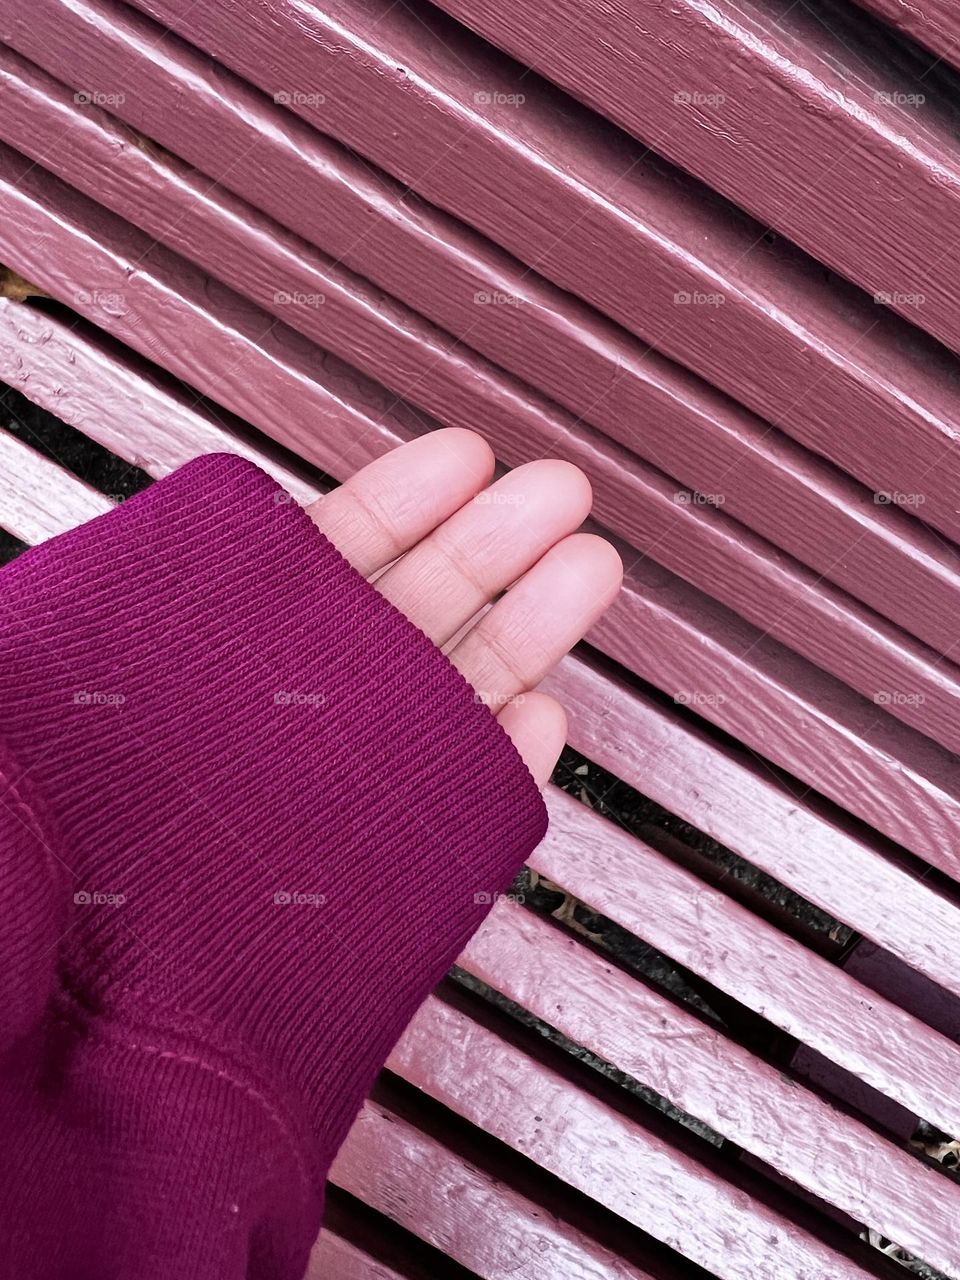 A person’s hand wearing a magenta sweatshirt against mauve background. 